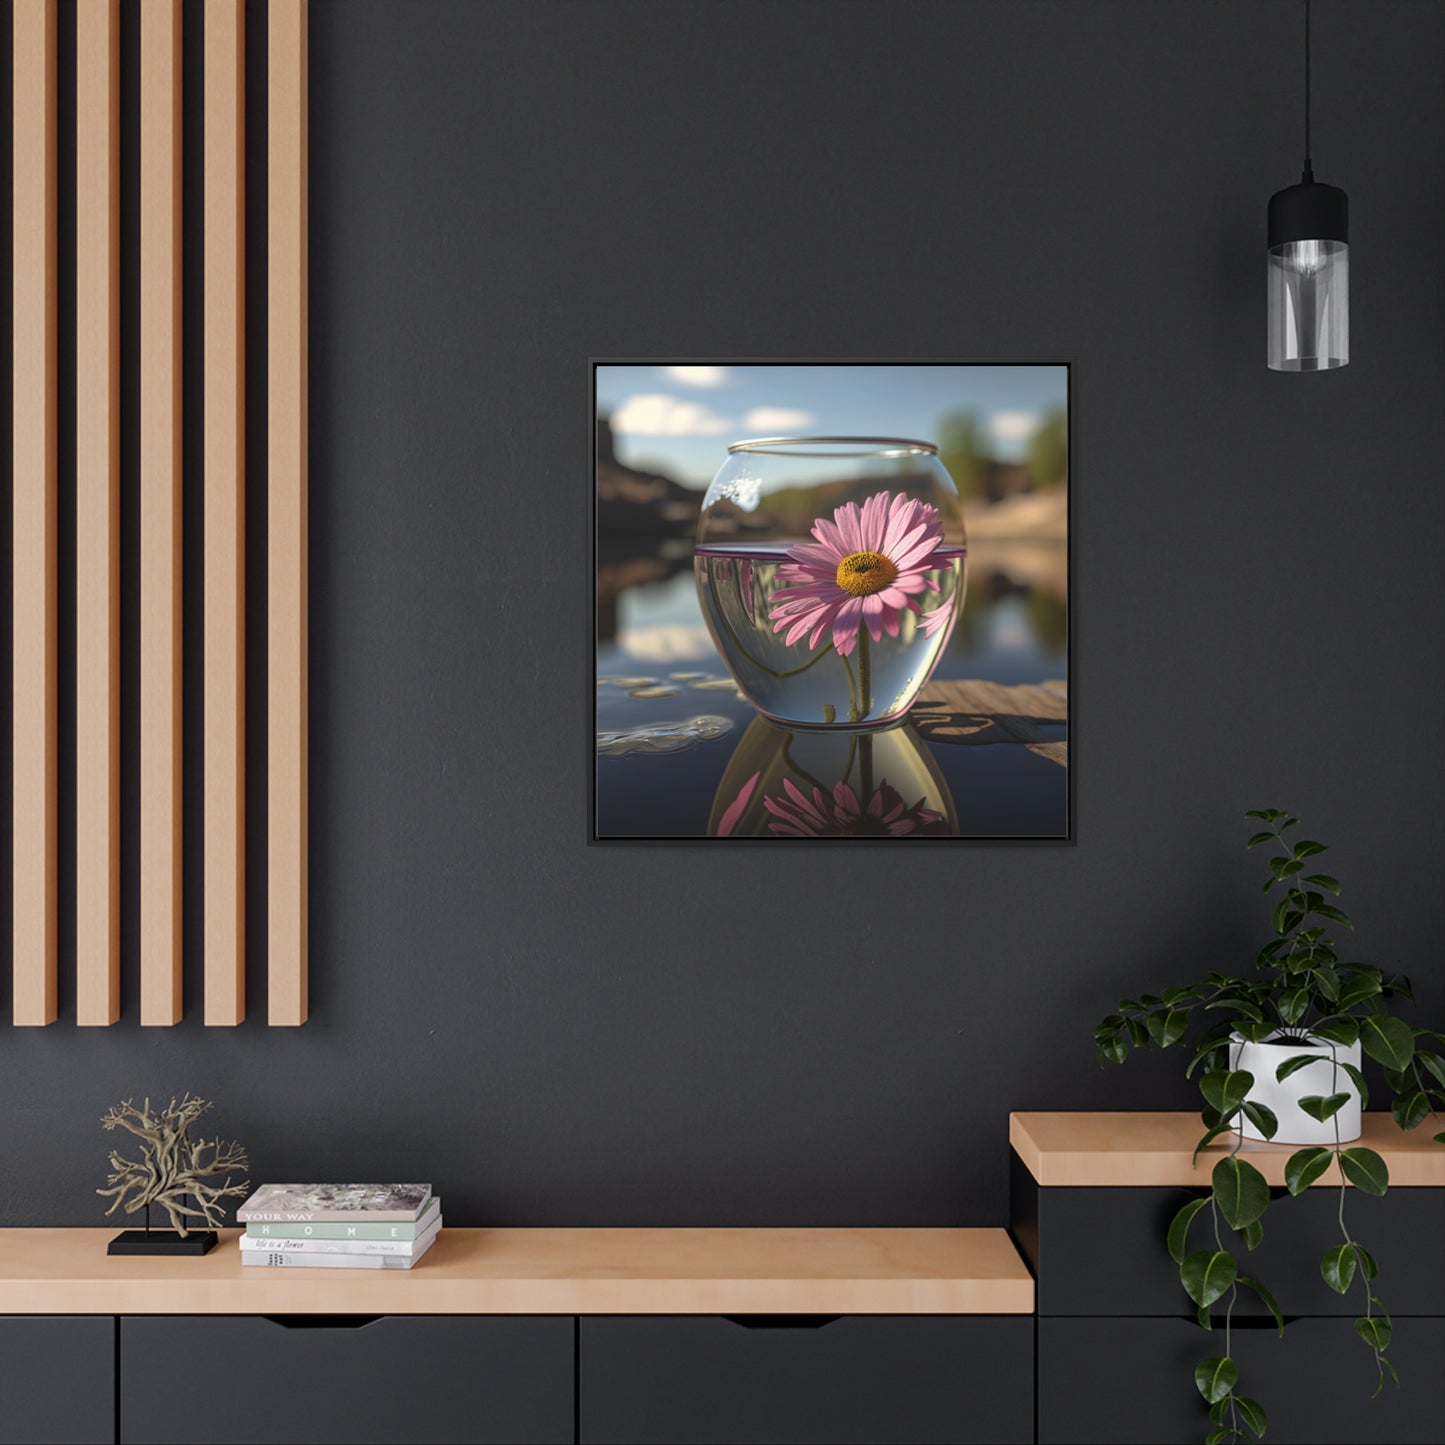 Gallery Canvas Wraps, Square Frame Daisy in a vase 1